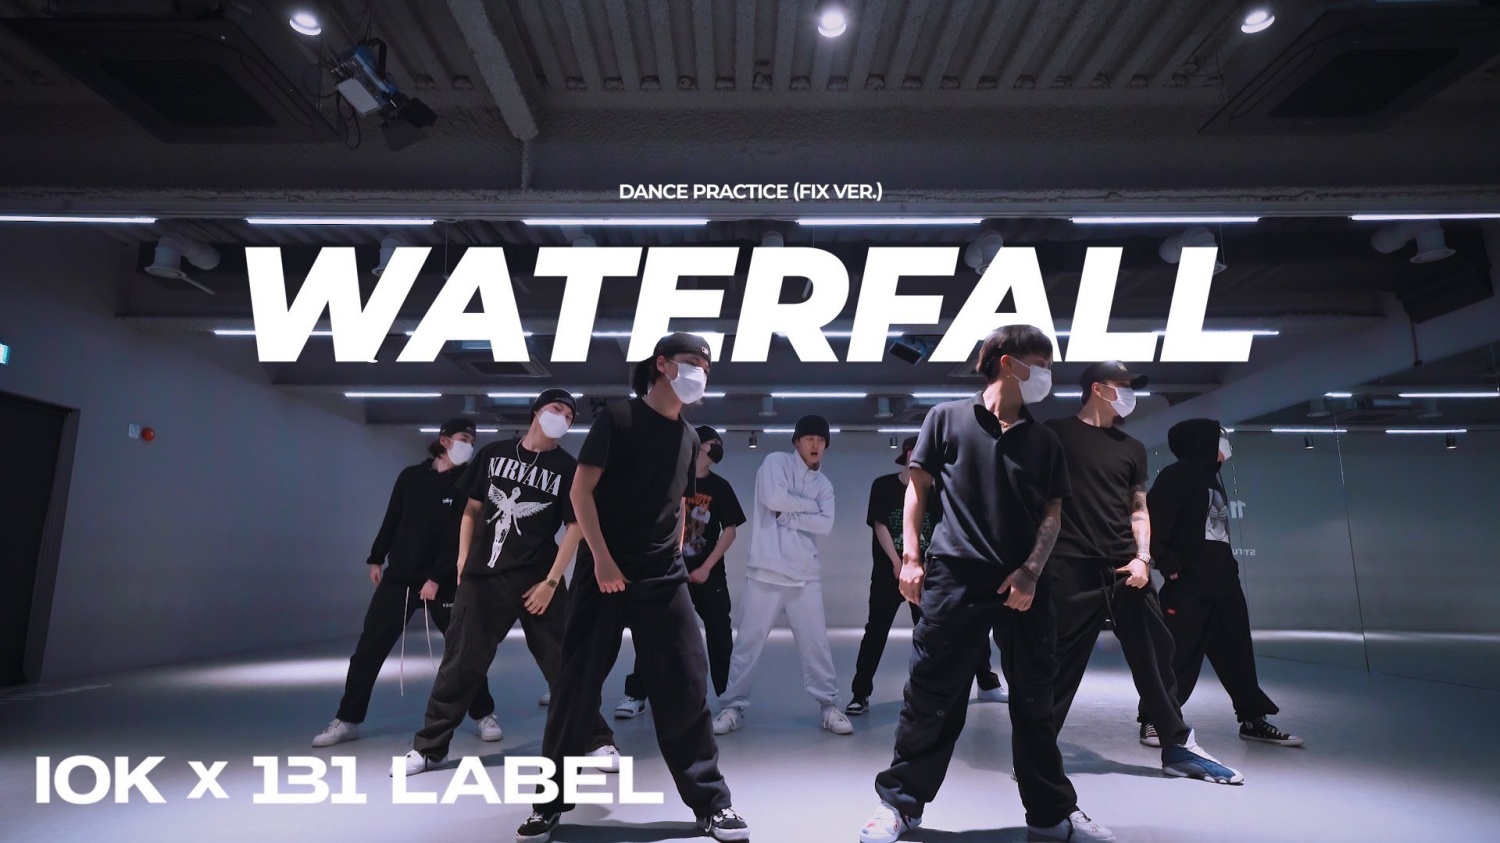 B.I, first solo regular 'Waterfall' 1st in 20 countries... global power